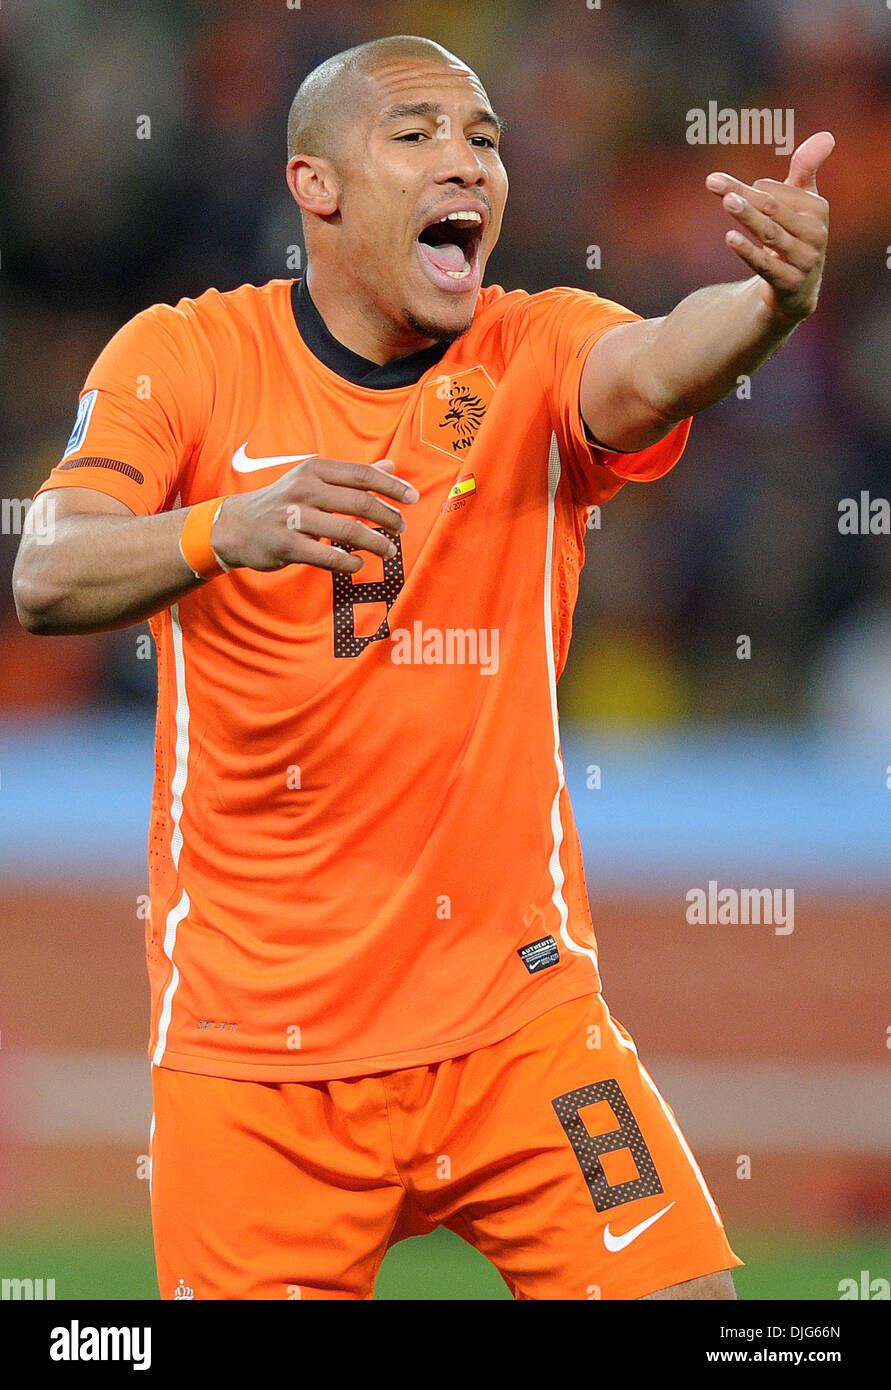 July 11, 2010 - Johannesburg, South Africa - Nigel De Jong of Netherlands gestures during the 2010 FIFA World Cup Final soccer match between Netherlands and Spain at Soccer City Stadium on July 11, 2010 in Johannesburg, South Africa. (Credit Image: © Luca Ghidoni/ZUMApress.com) Stock Photo